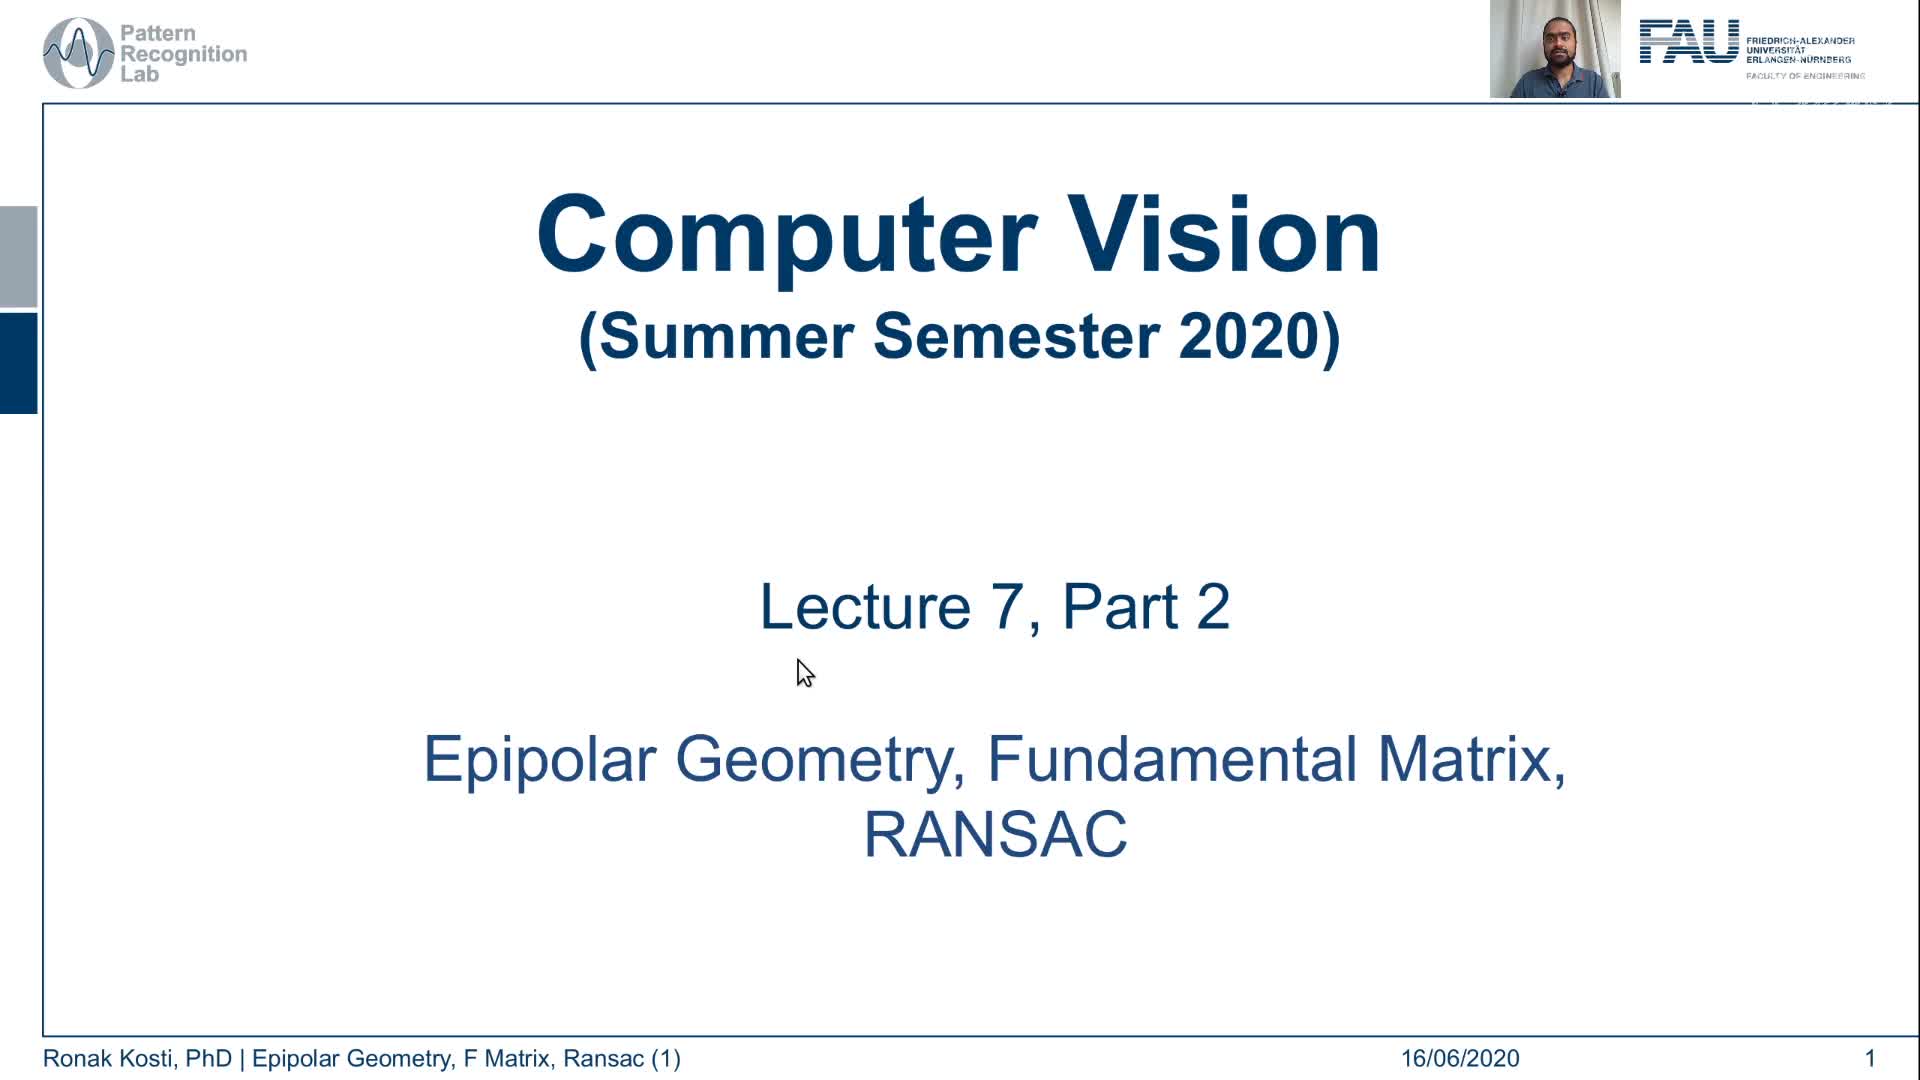 (Lecture 7, Part 2) Epipolar Geometry and Ransac preview image